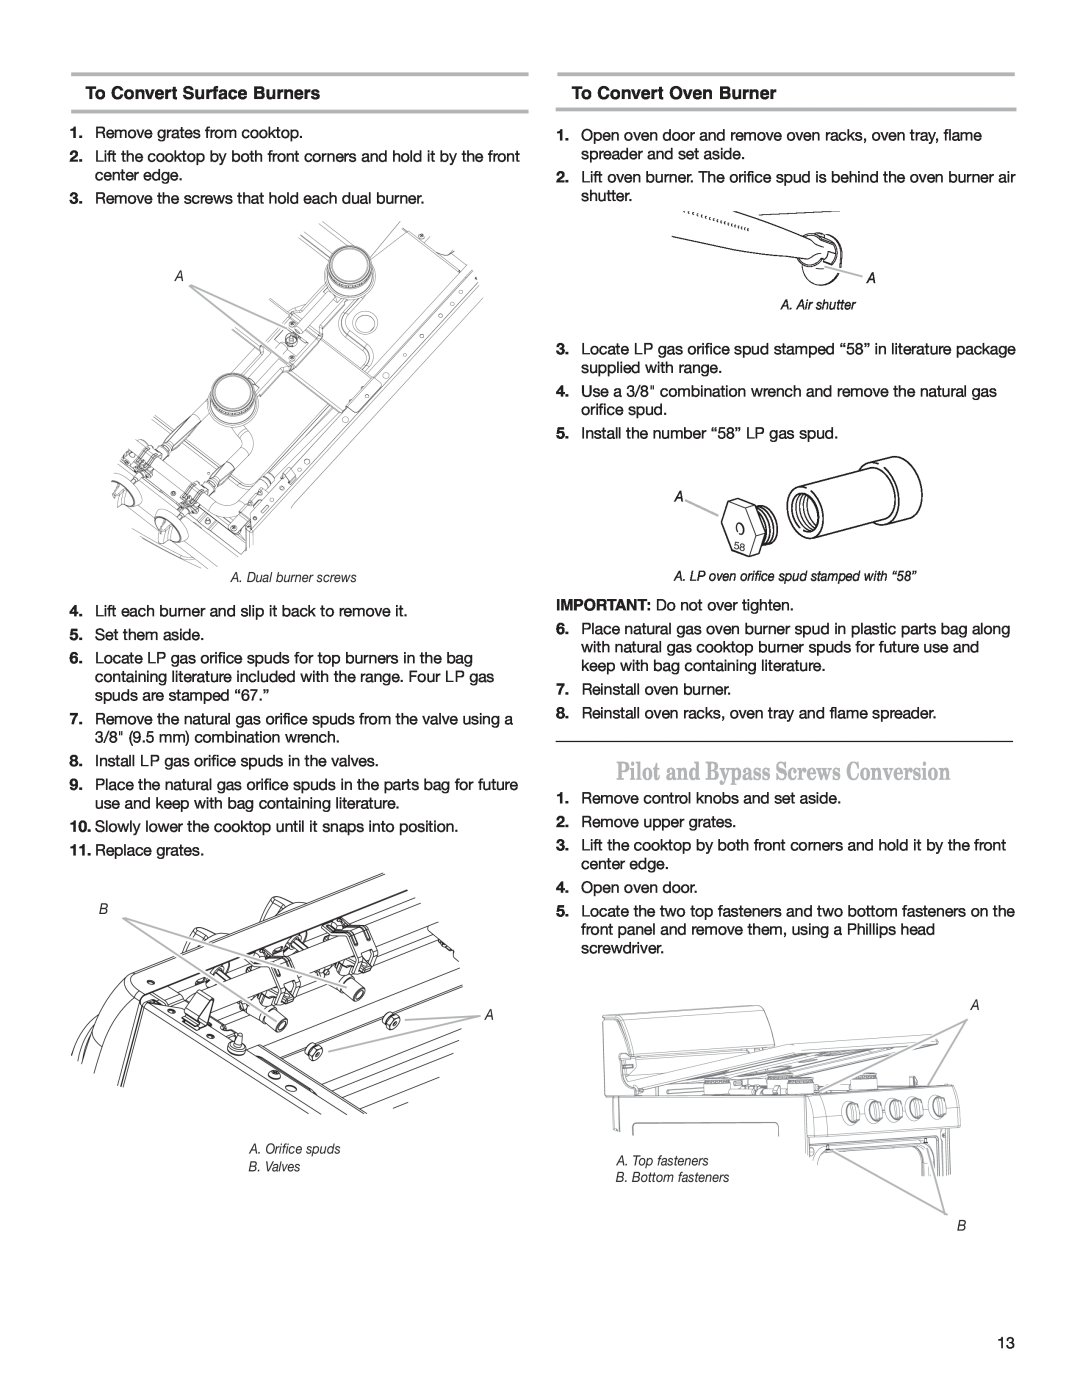 Whirlpool W10173324B Pilot and Bypass Screws Conversion, To Convert Surface Burners, To Convert Oven Burner 